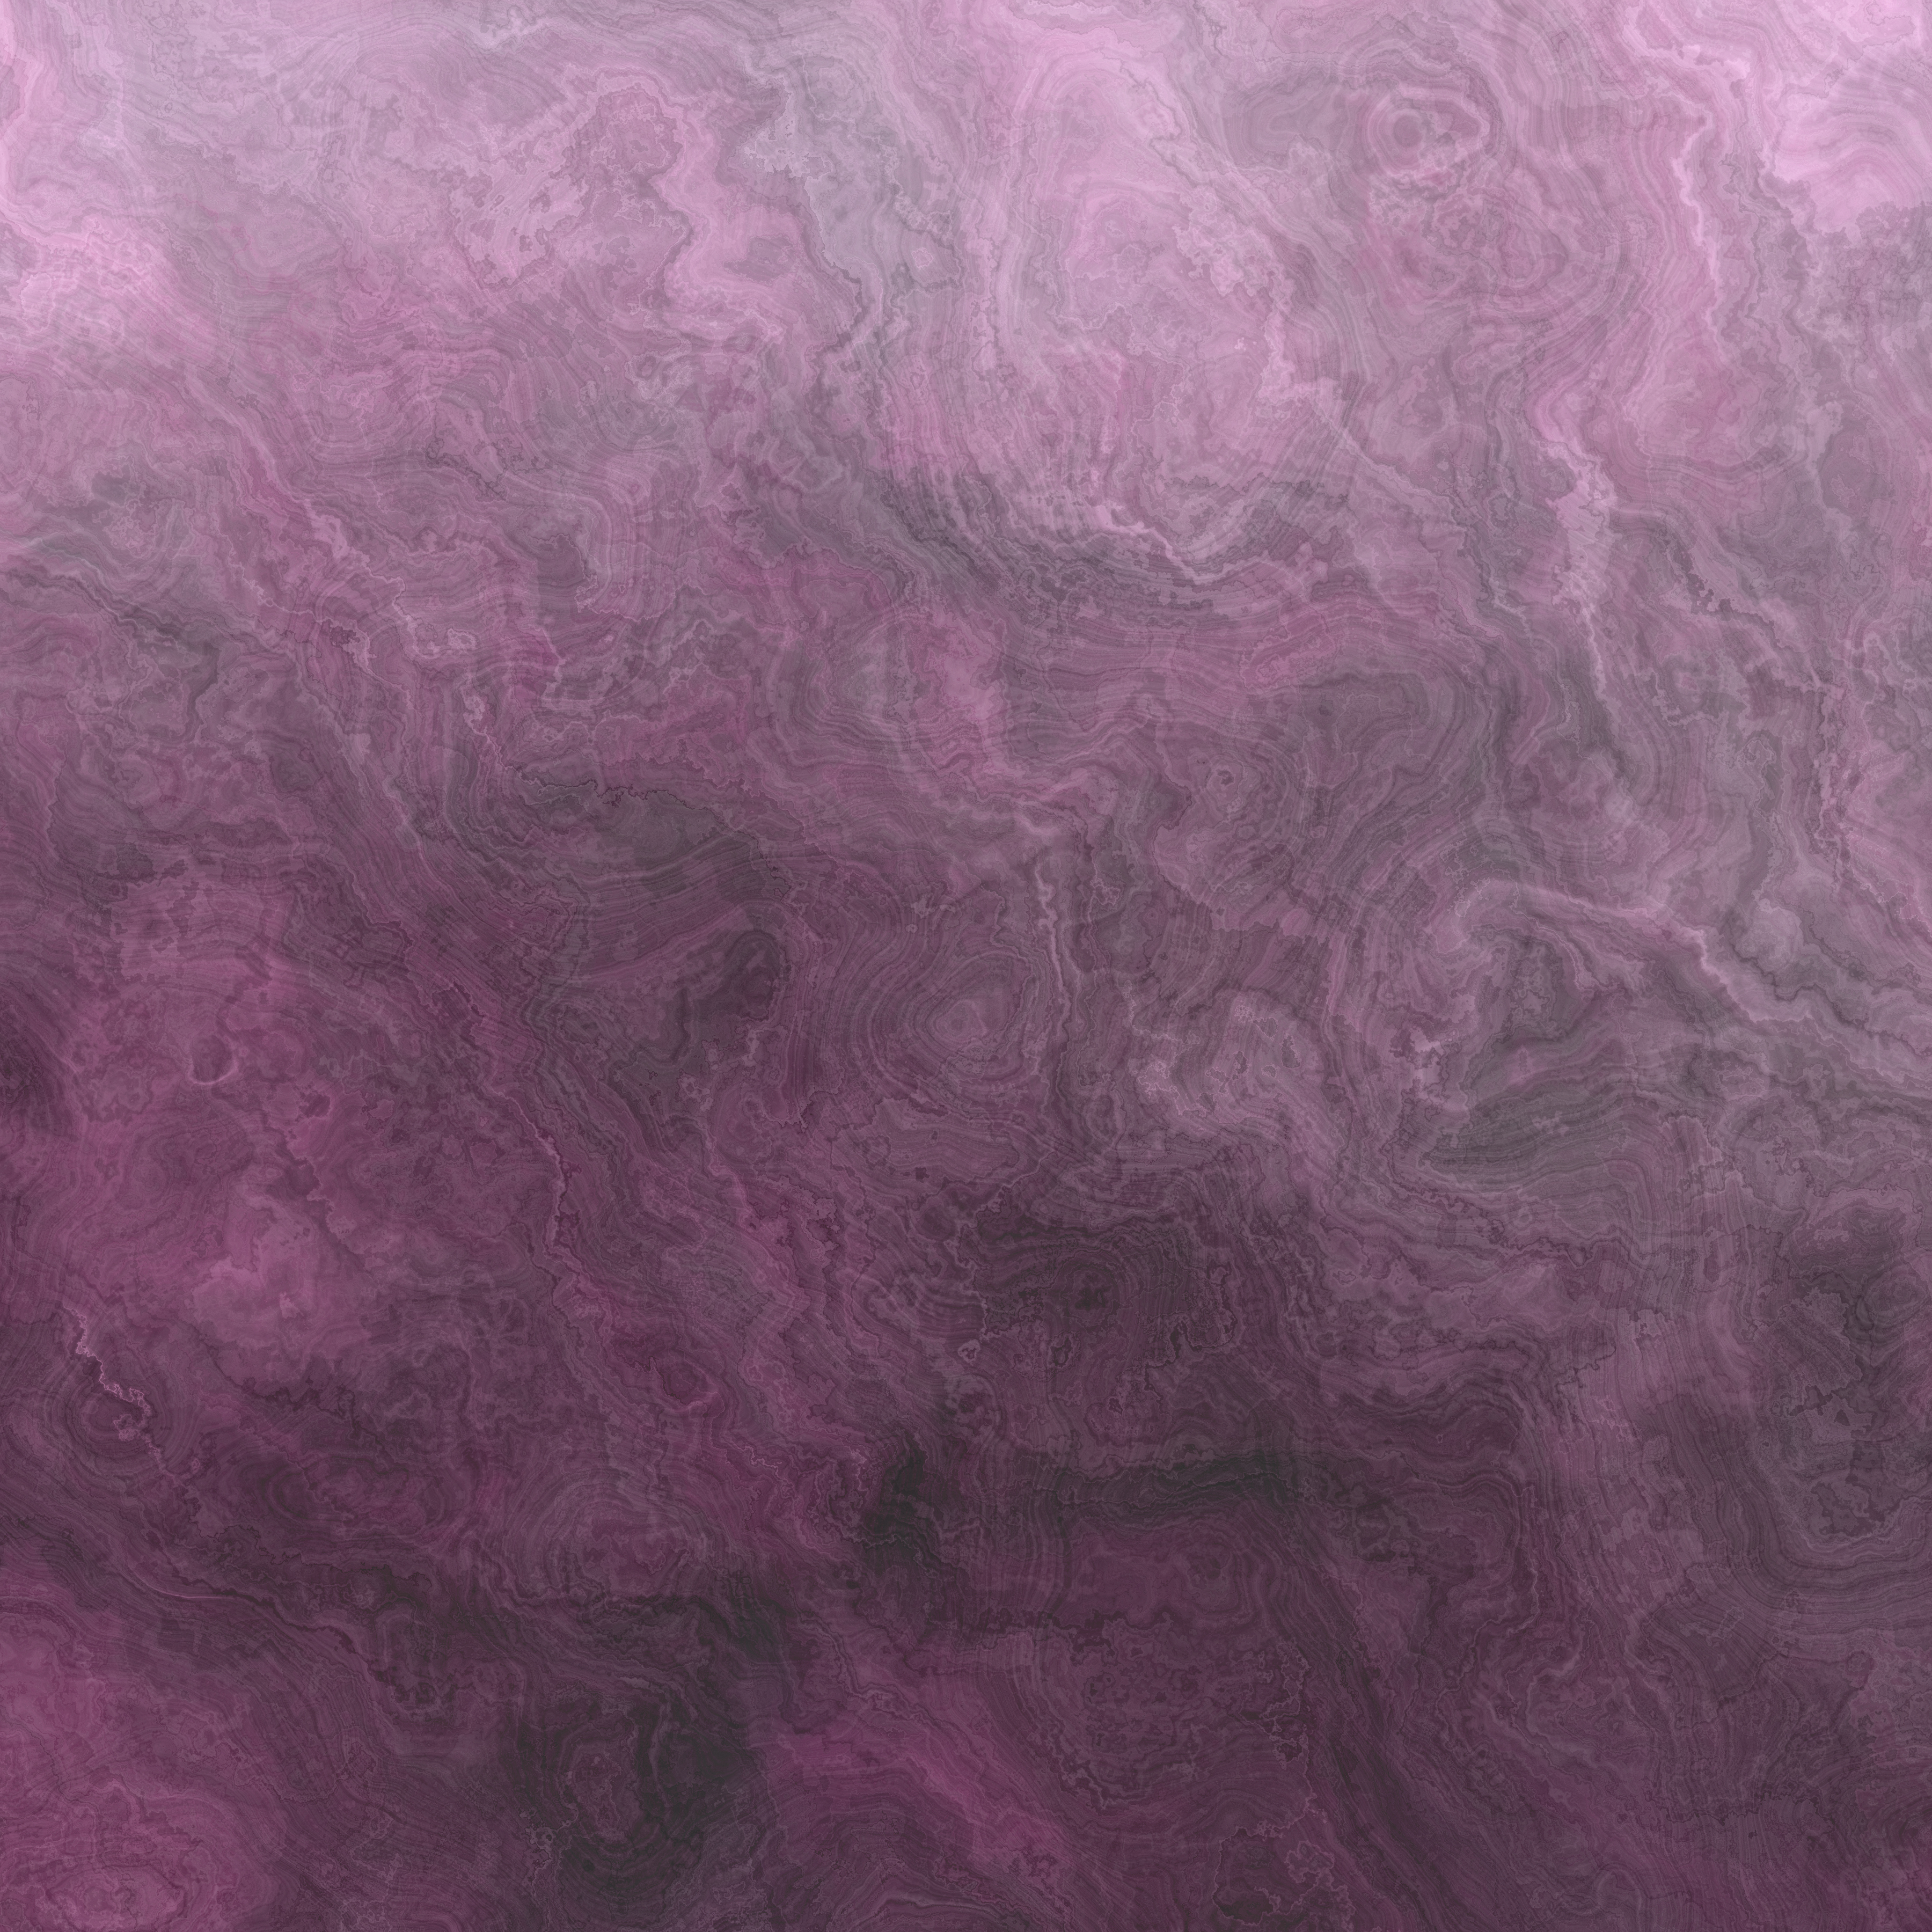 stains, texture, textures, violet New Lock Screen Backgrounds